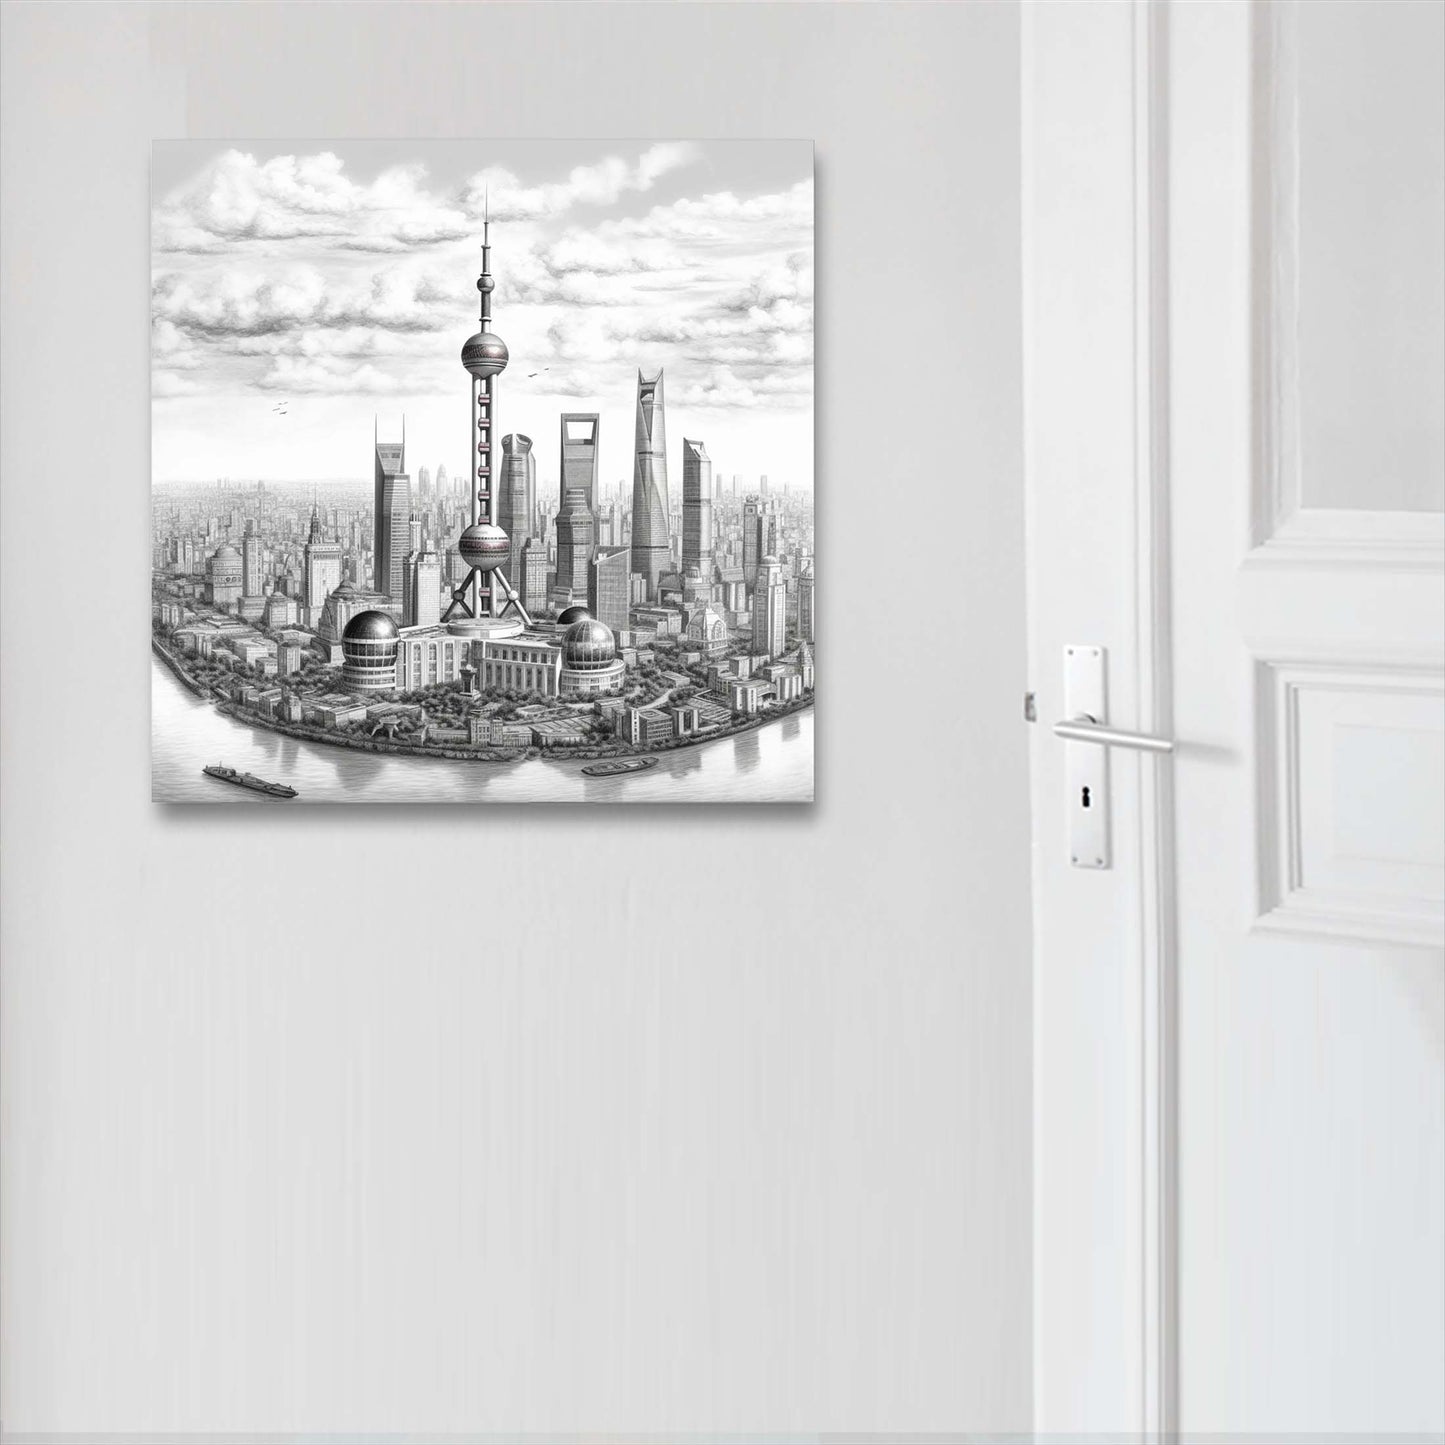 Shanghai Skyline - Mural in the style of a drawing